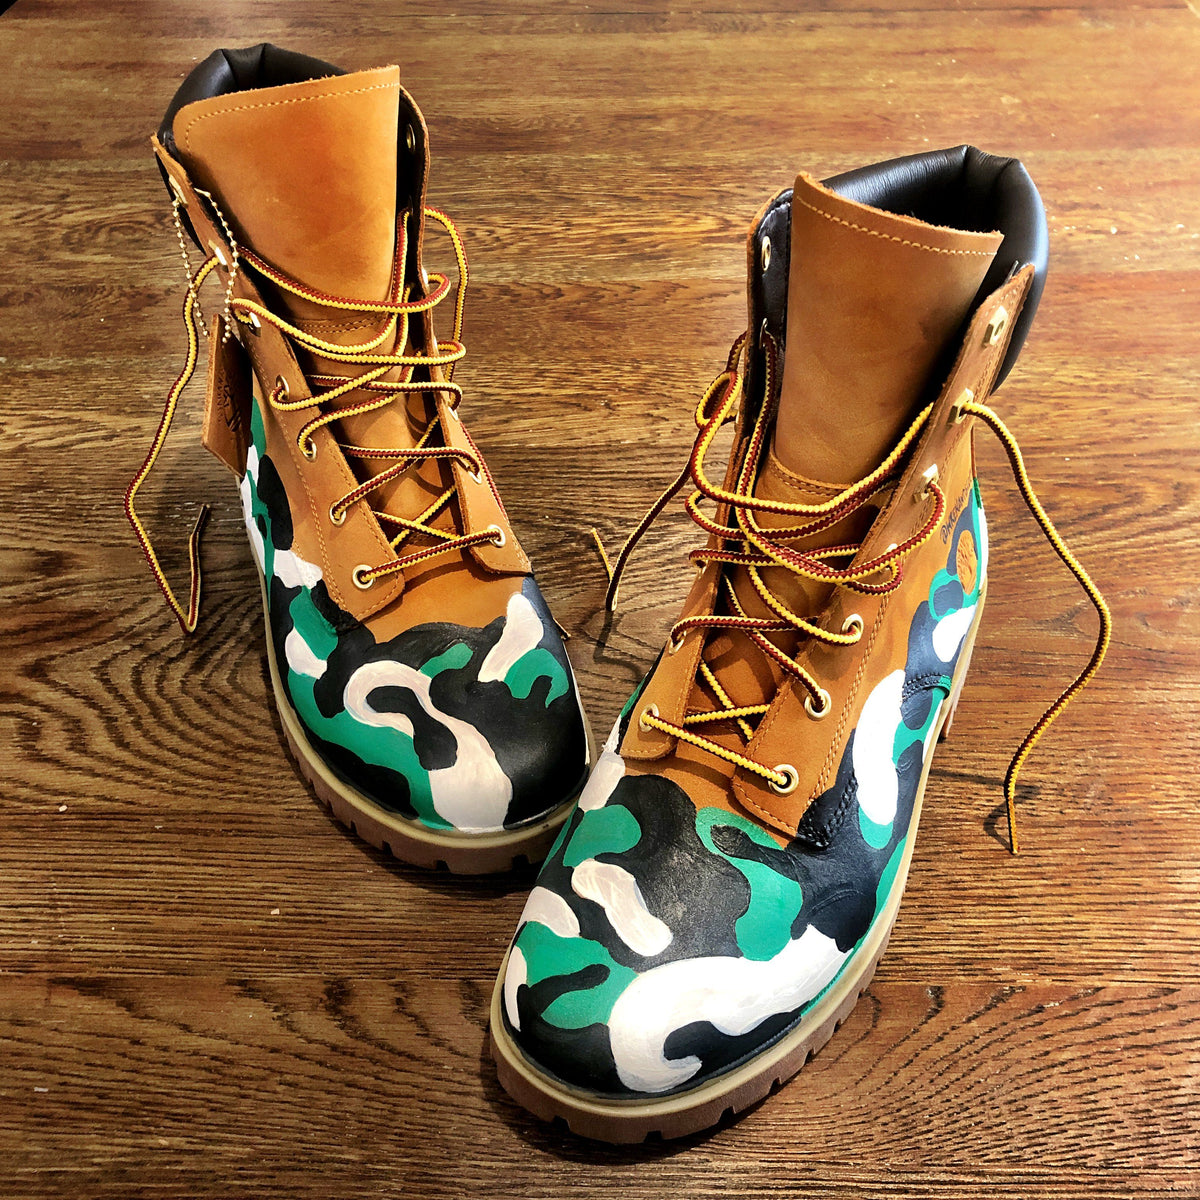 Green, white and black camo style painted boots. Painted on waterproof Timberland Boots. Signed @wrenandglory. 